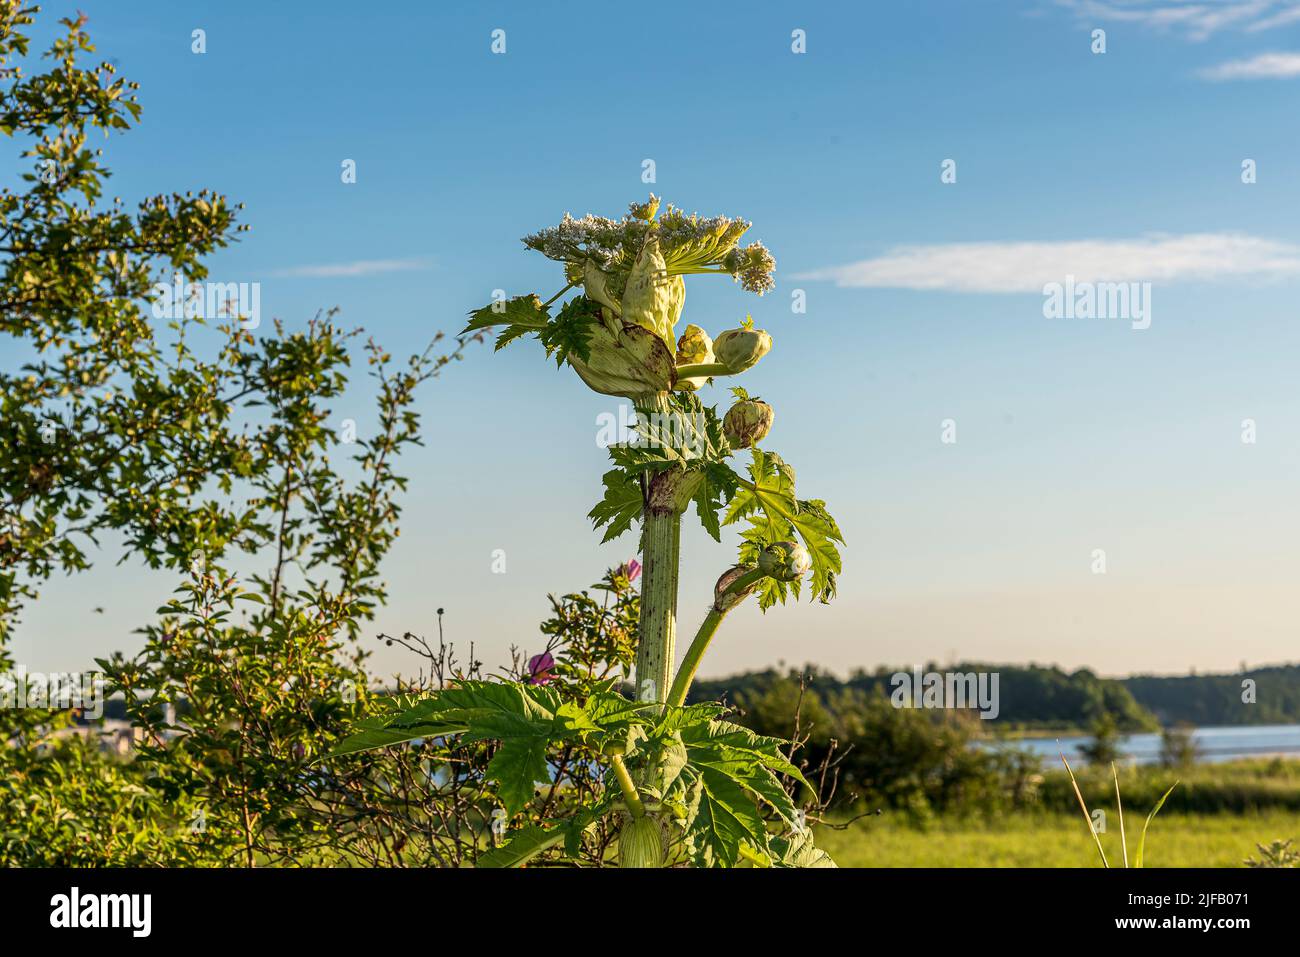 Giant hogweed is a poisonous plant and invasive in the dansih nature, Denmark, June 29, 2022 Stock Photo